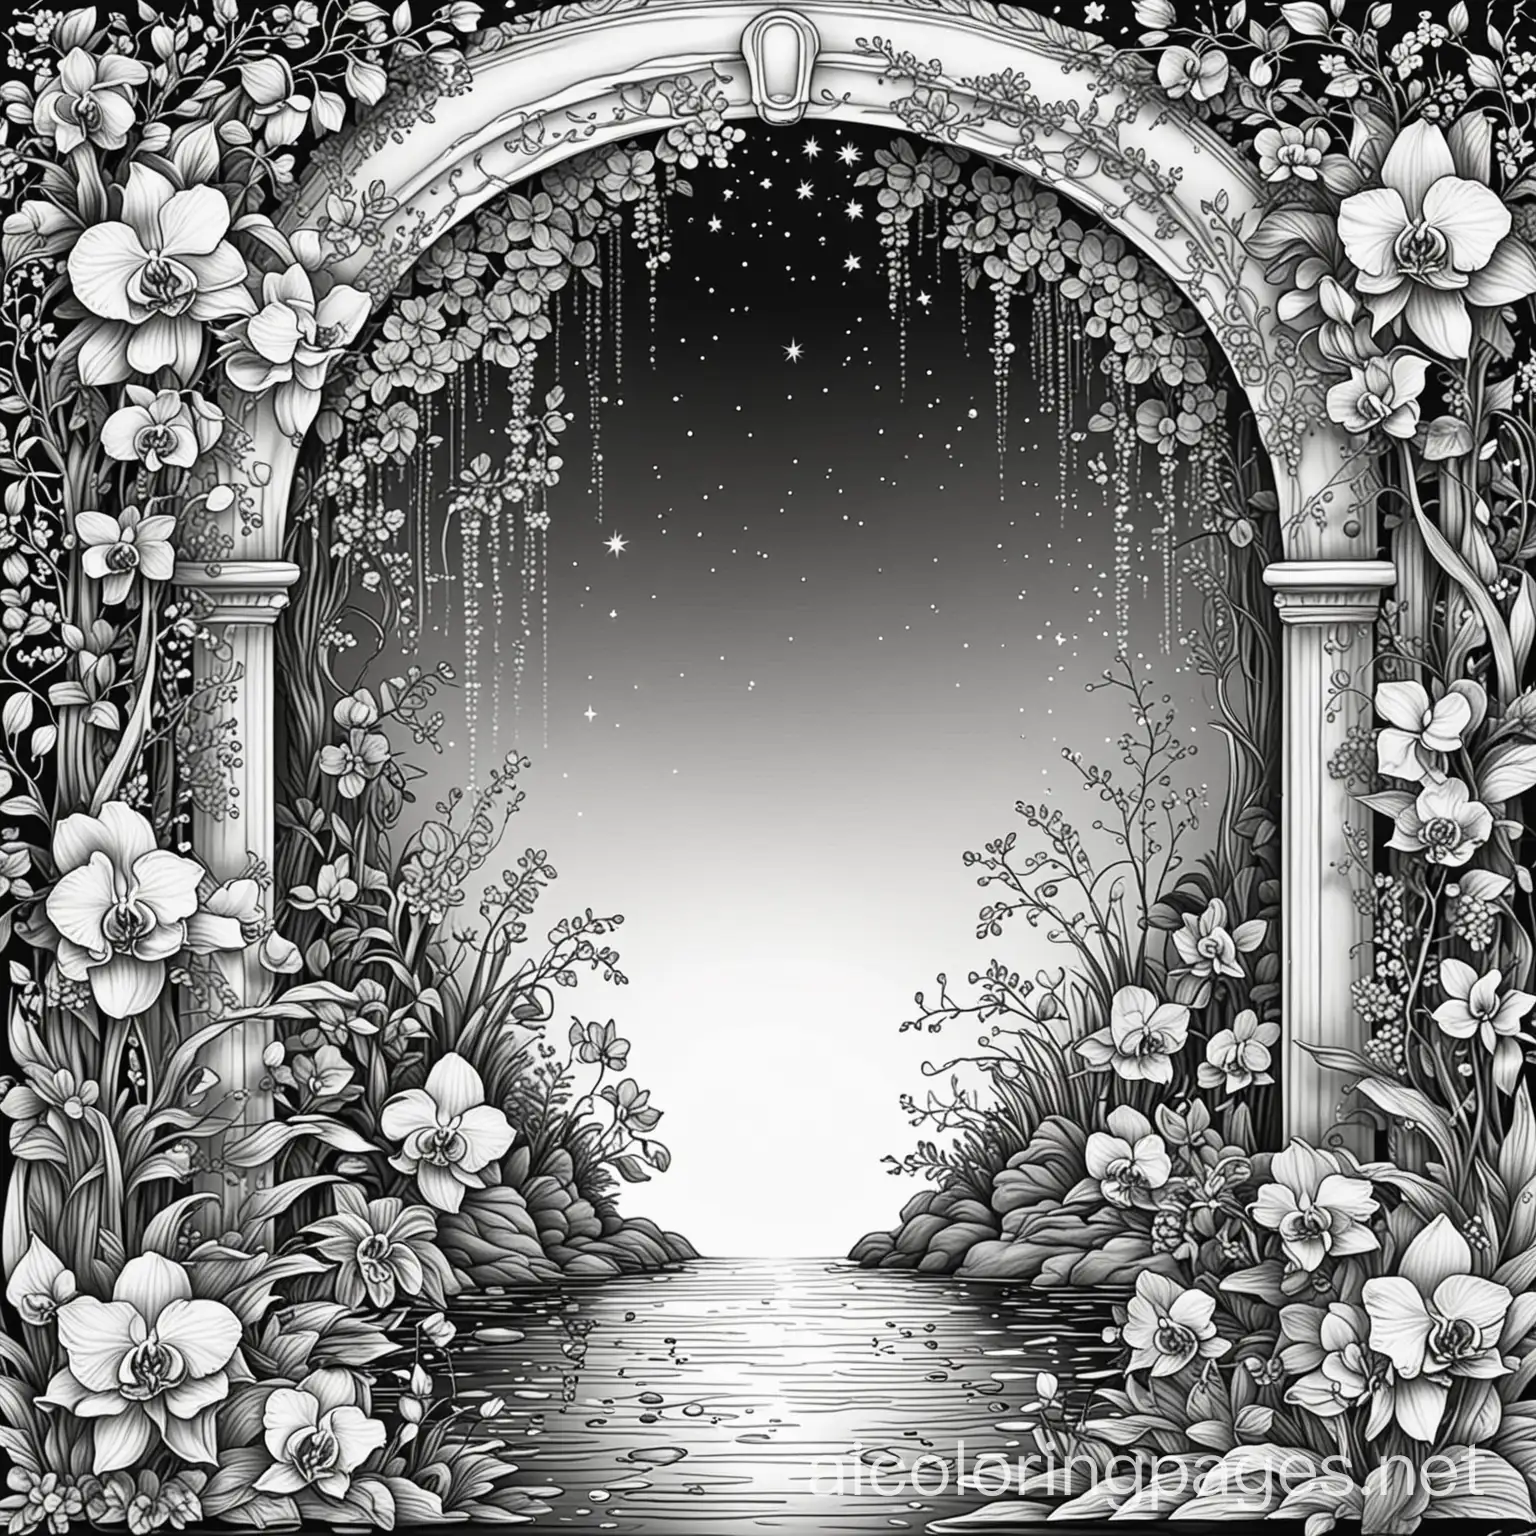 inverted mirror image reverse waterfall under dark night sky with stars bright colors hanging vines exotic flowers orchids roses
, Coloring Page, black and white, line art, white background, Simplicity, Ample White Space. The background of the coloring page is plain white to make it easy for young children to color within the lines. The outlines of all the subjects are easy to distinguish, making it simple for kids to color without too much difficulty